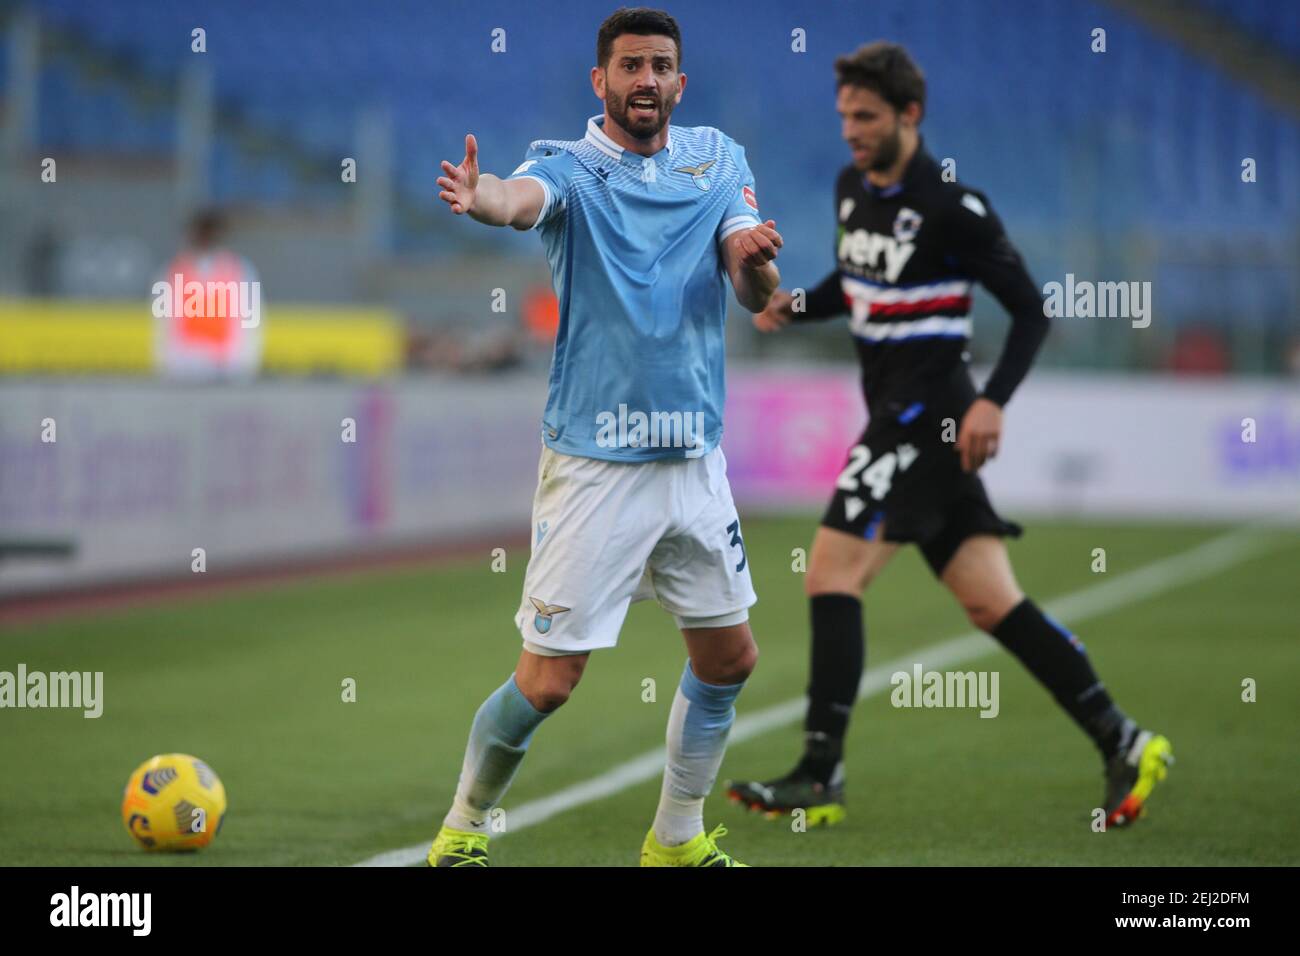 Rome, Italy. 20th Feb, 2021. ROME, Italy - 20.02.2021: MUSACCHIO in action during the Italian Serie A league 2021 soccer match between SS LAZIO VS SAMPDORIA, at Olympic stadium in Rome Credit: Independent Photo Agency/Alamy Live News Stock Photo